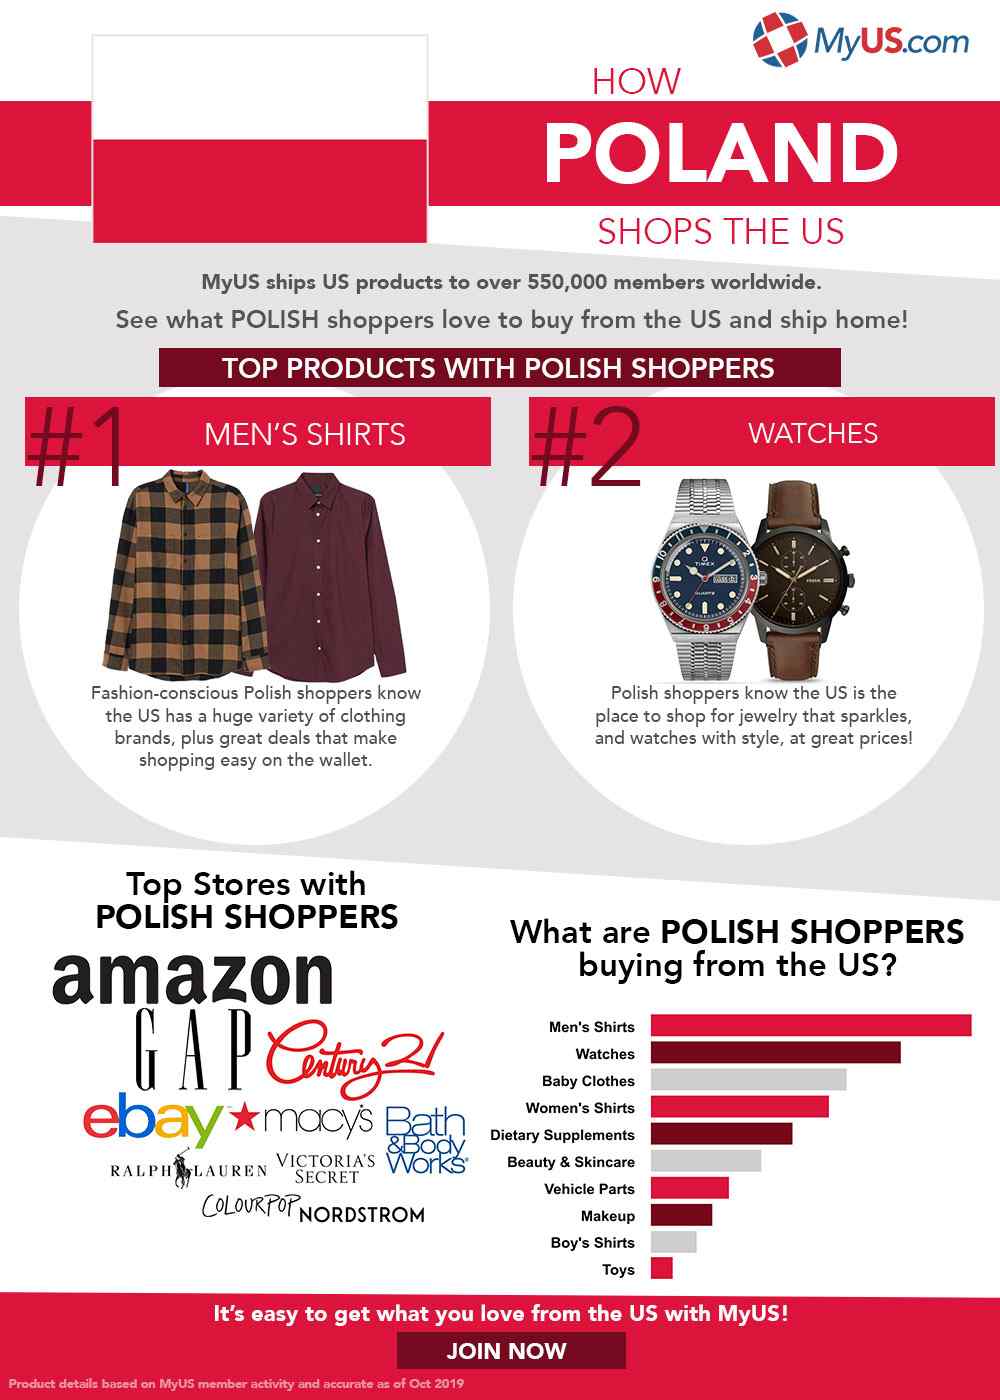 Infographic of how Poland shops the US, with top stores shopped and top categories of men's shirts and watches